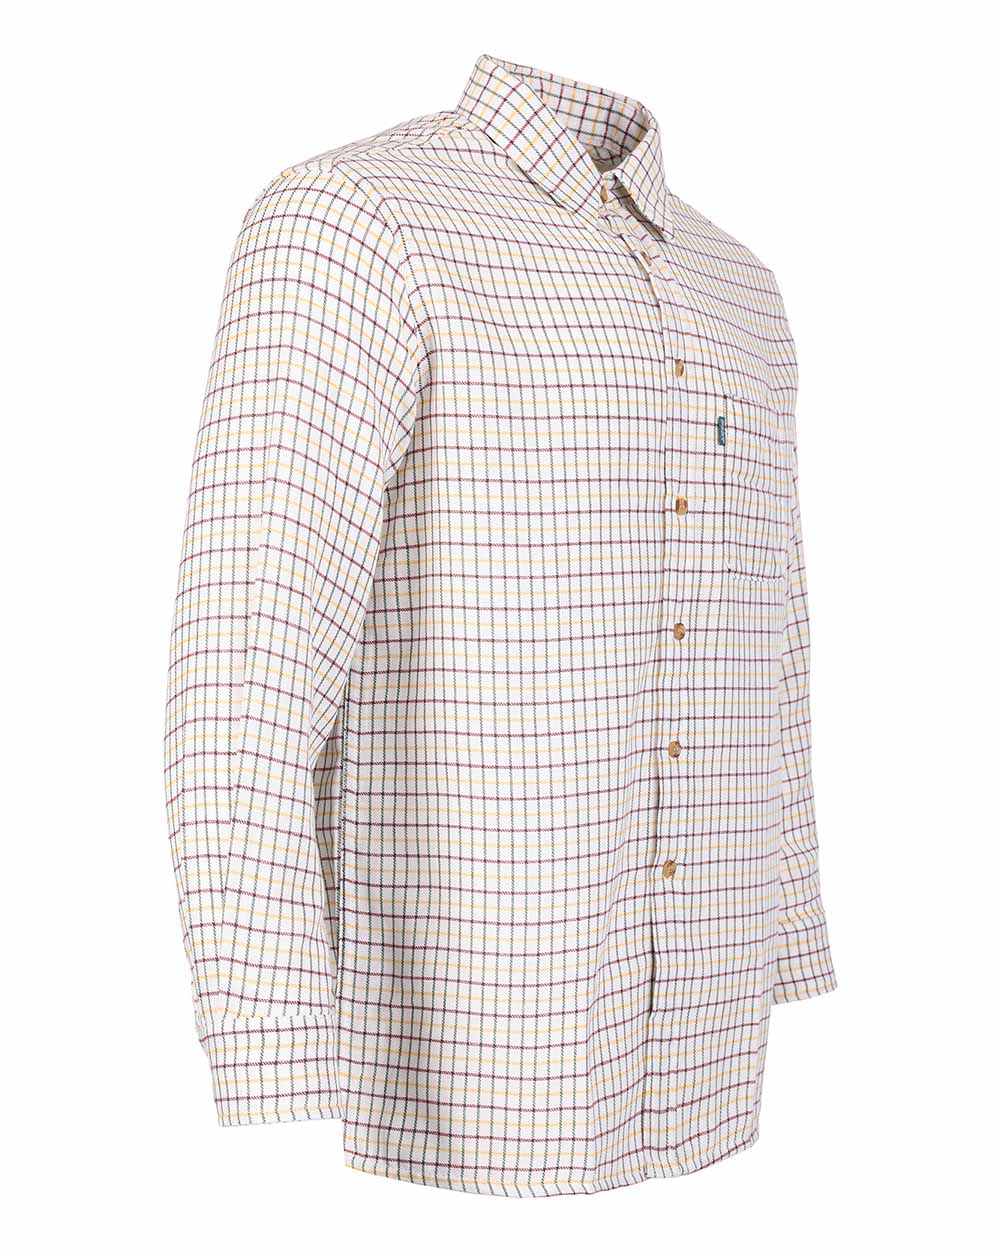 Green coloured Fort Tattersall Shirt on white background 